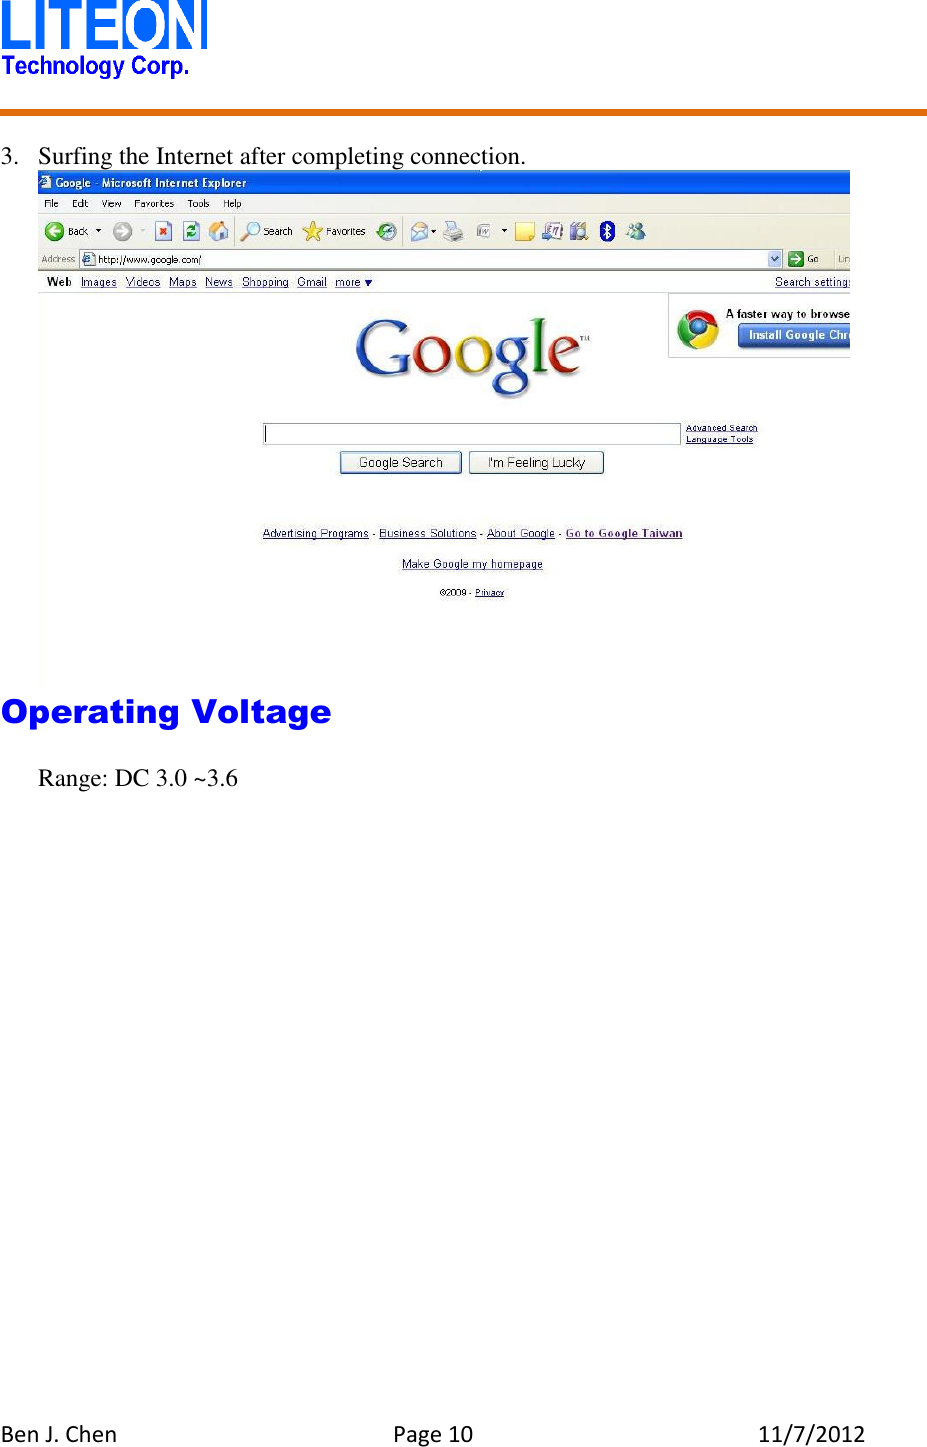   Ben J. Chen  Page 10  11/7/2012    3. Surfing the Internet after completing connection.  Operating Voltage    Range: DC 3.0 ~3.6 